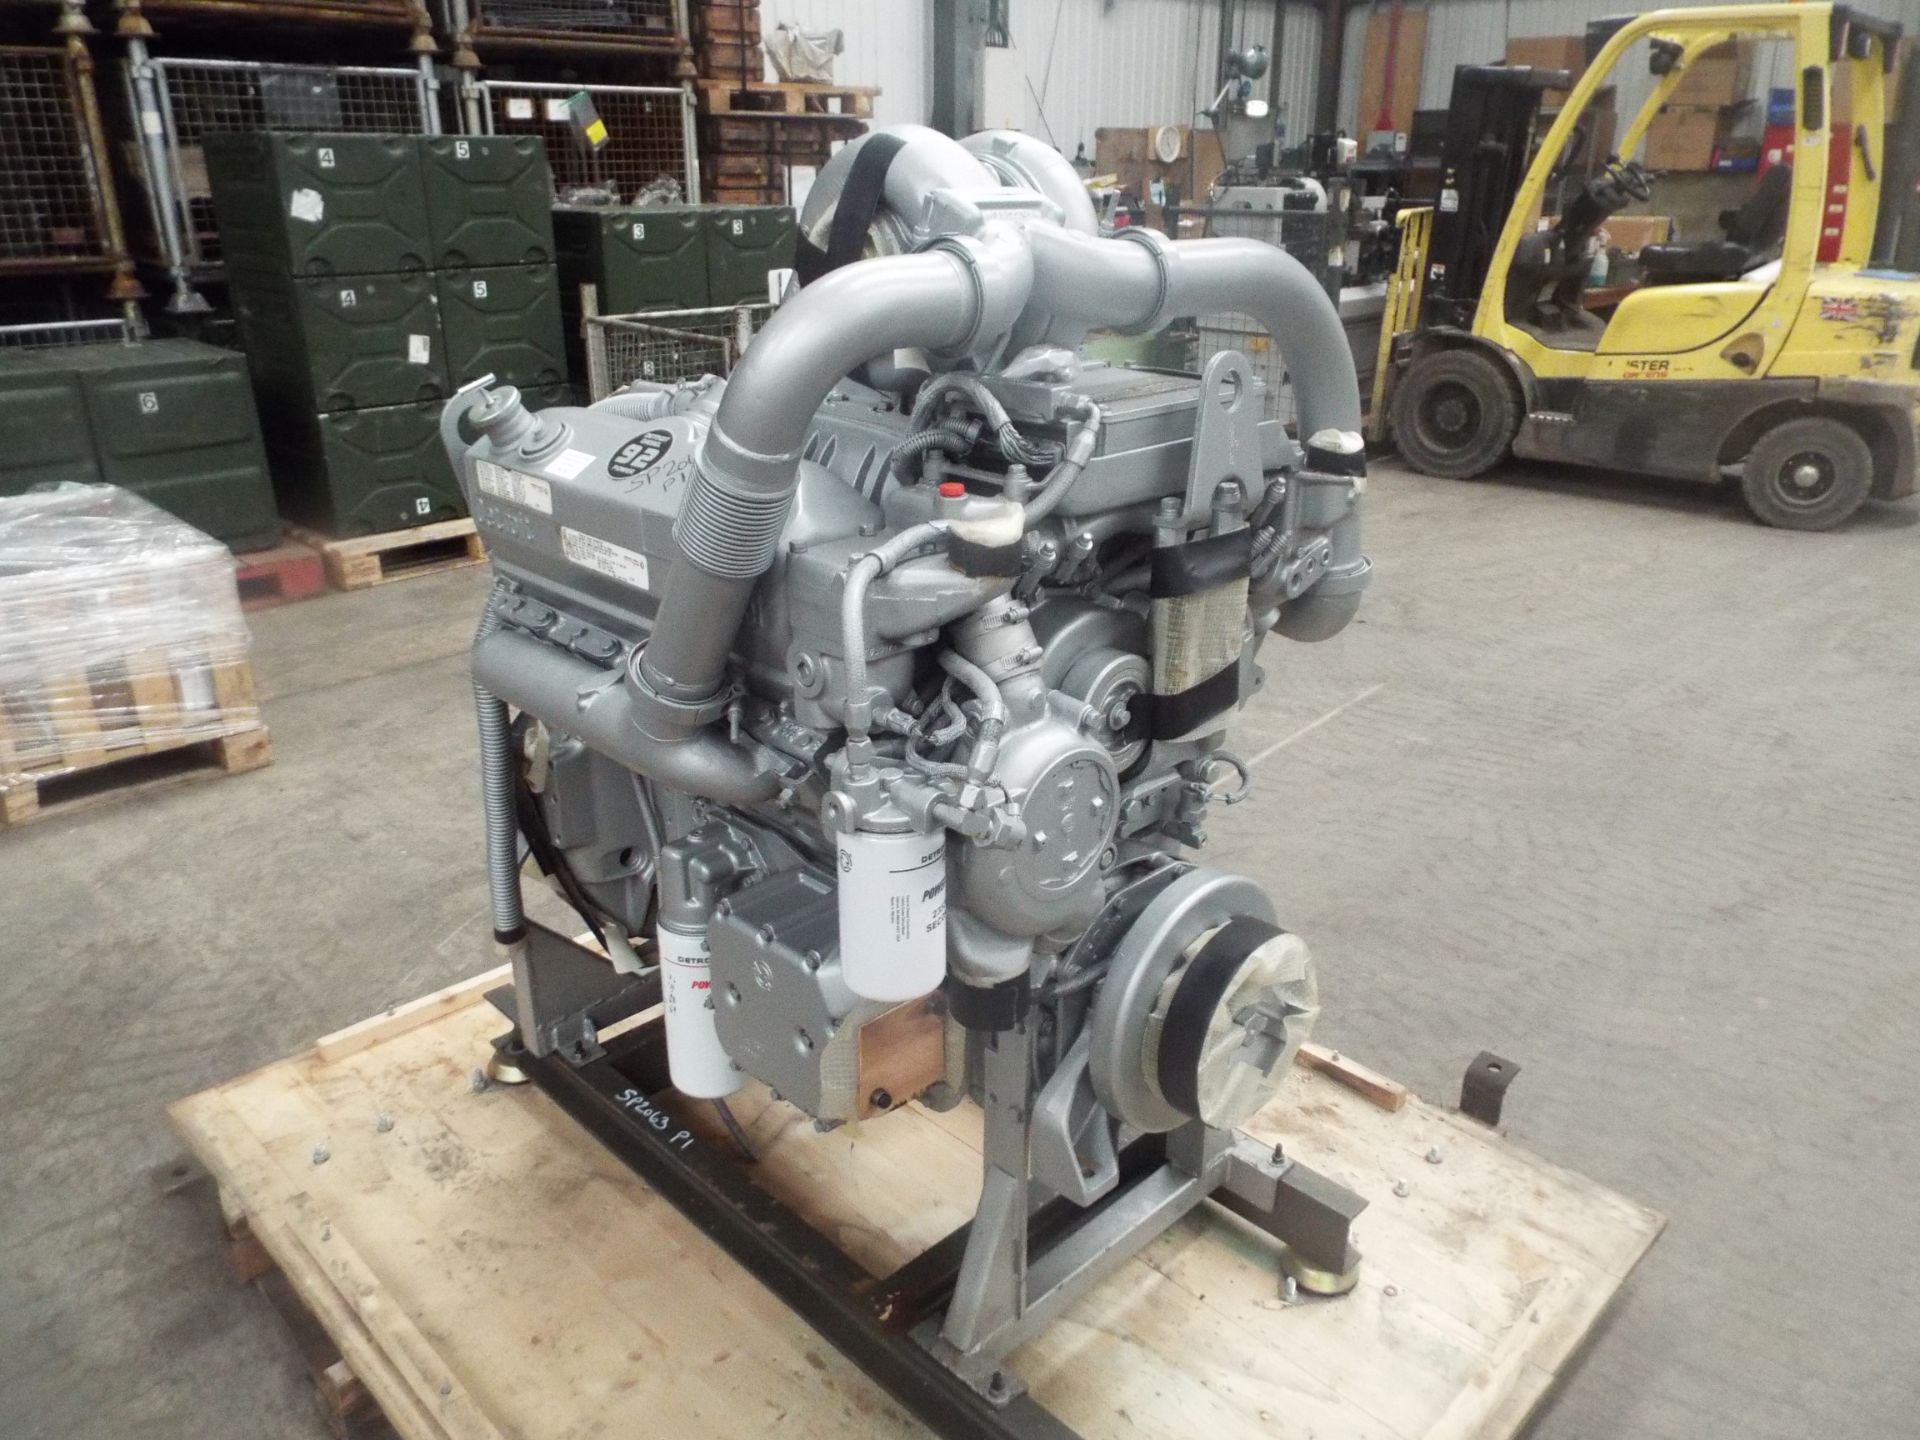 Detroit 8V-92TA DDEC V8 Turbo Diesel Engine Complete with Ancillaries and Starter Motor - Image 2 of 20